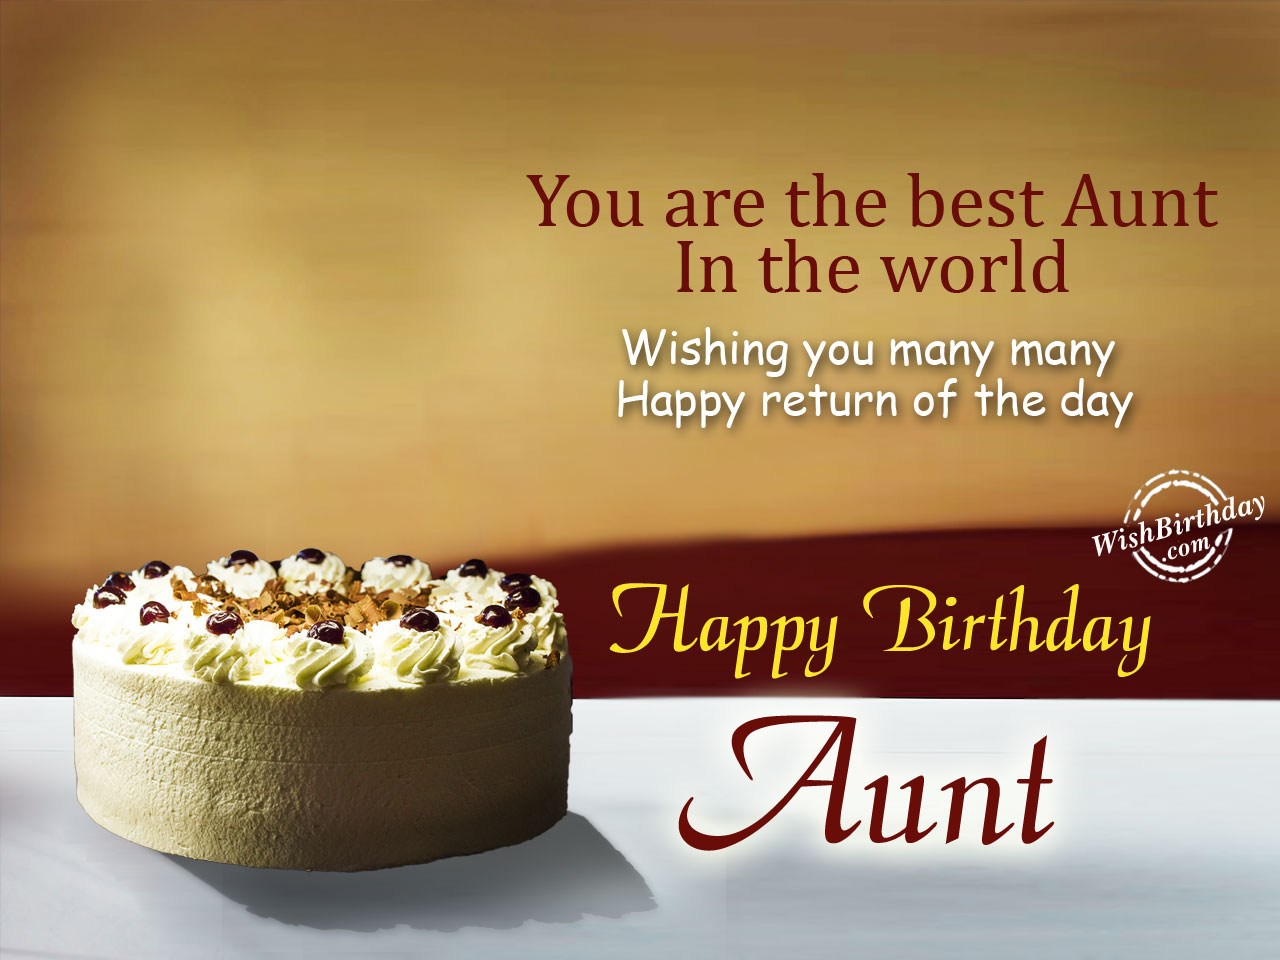 You are the best aunt in the world - Birthday Wishes, Happy 